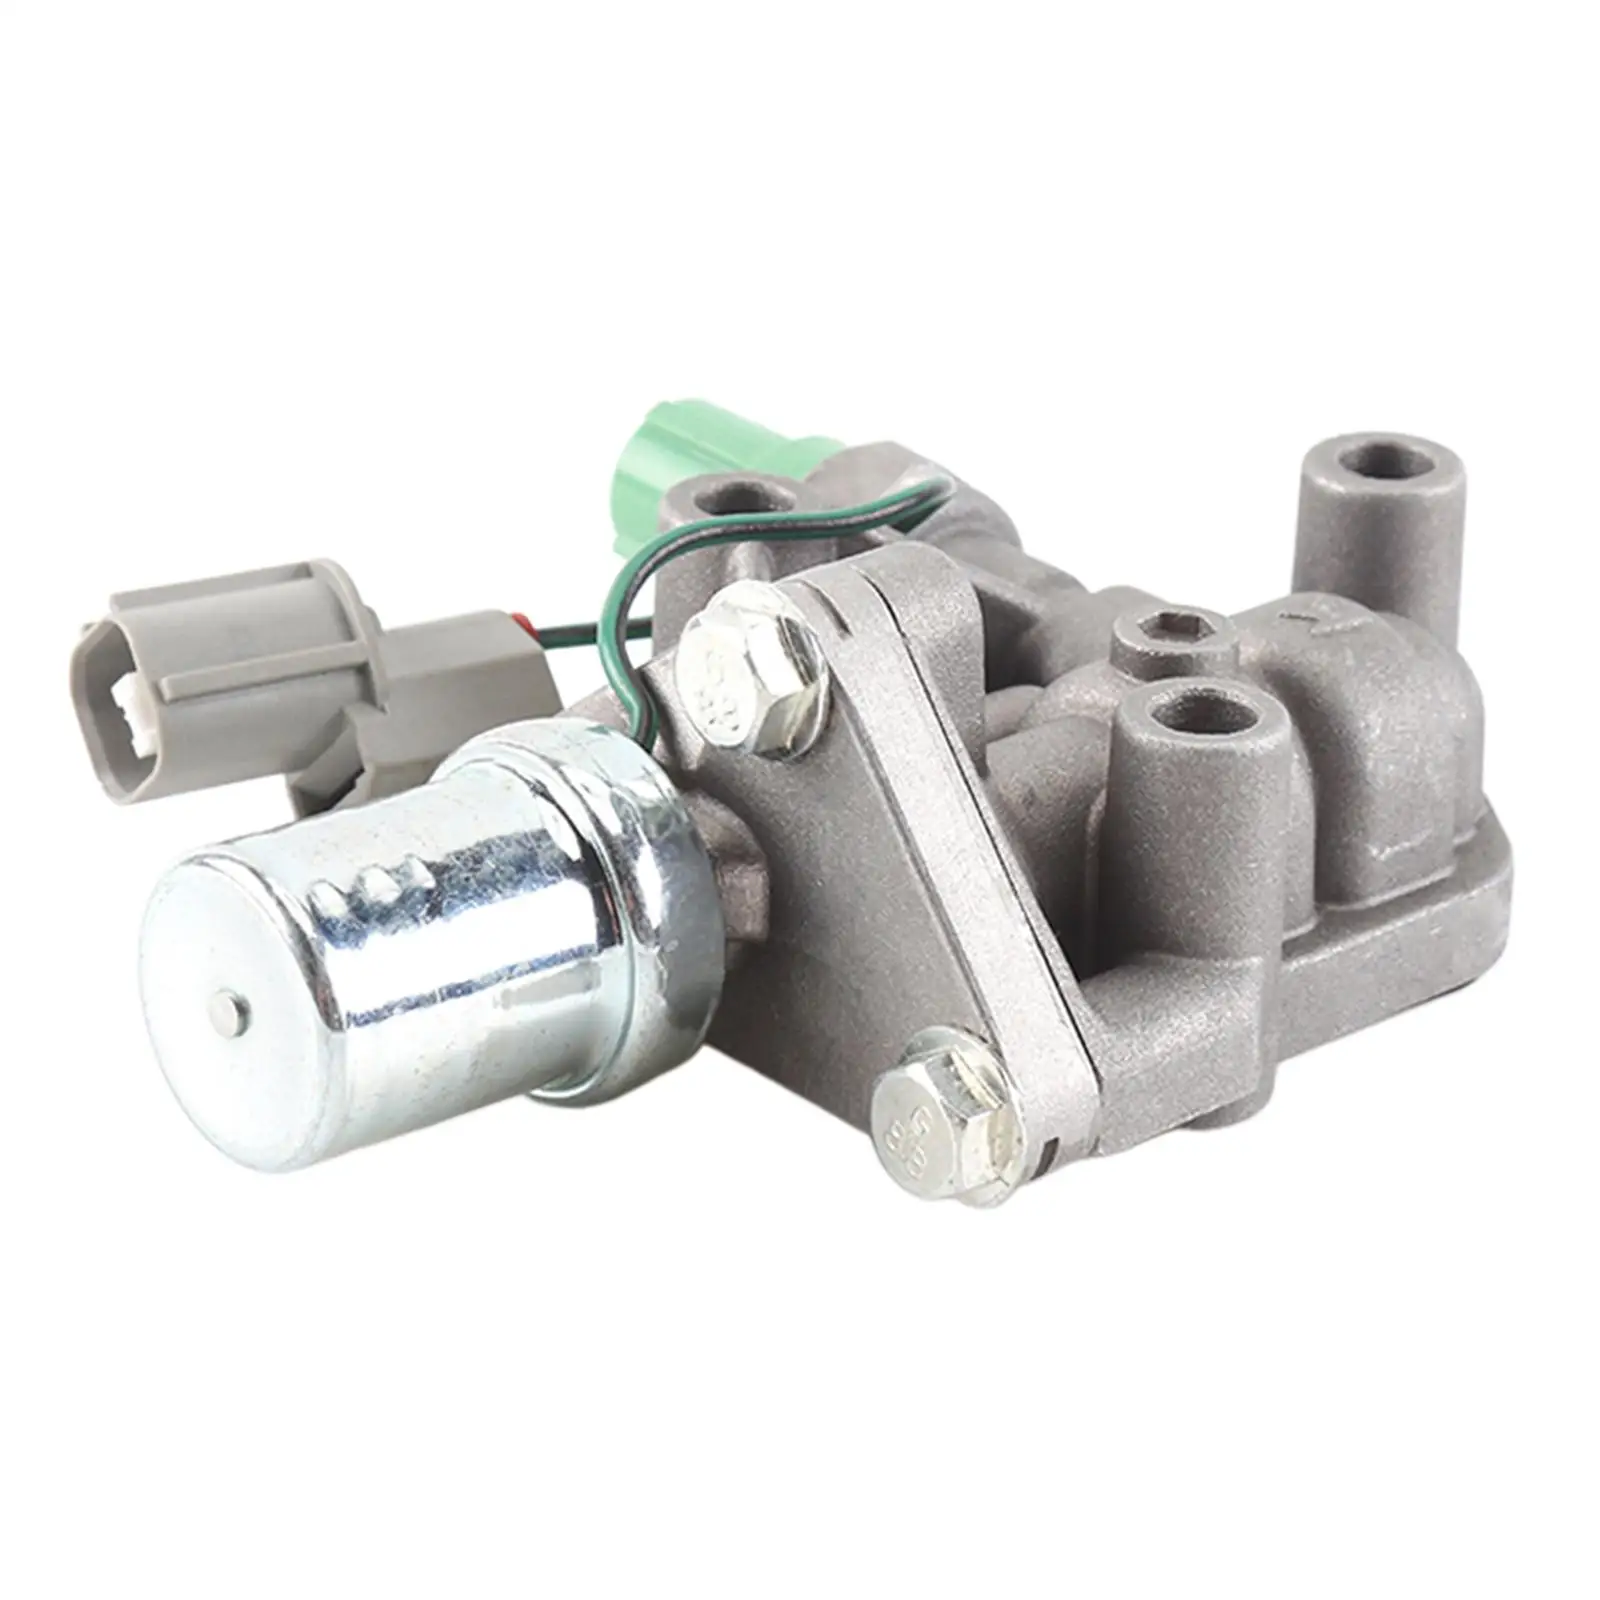 

Solenoid Spool Valve 15810P2RA0 1996-2000 Replace Meet the quality standards, tested before shipment